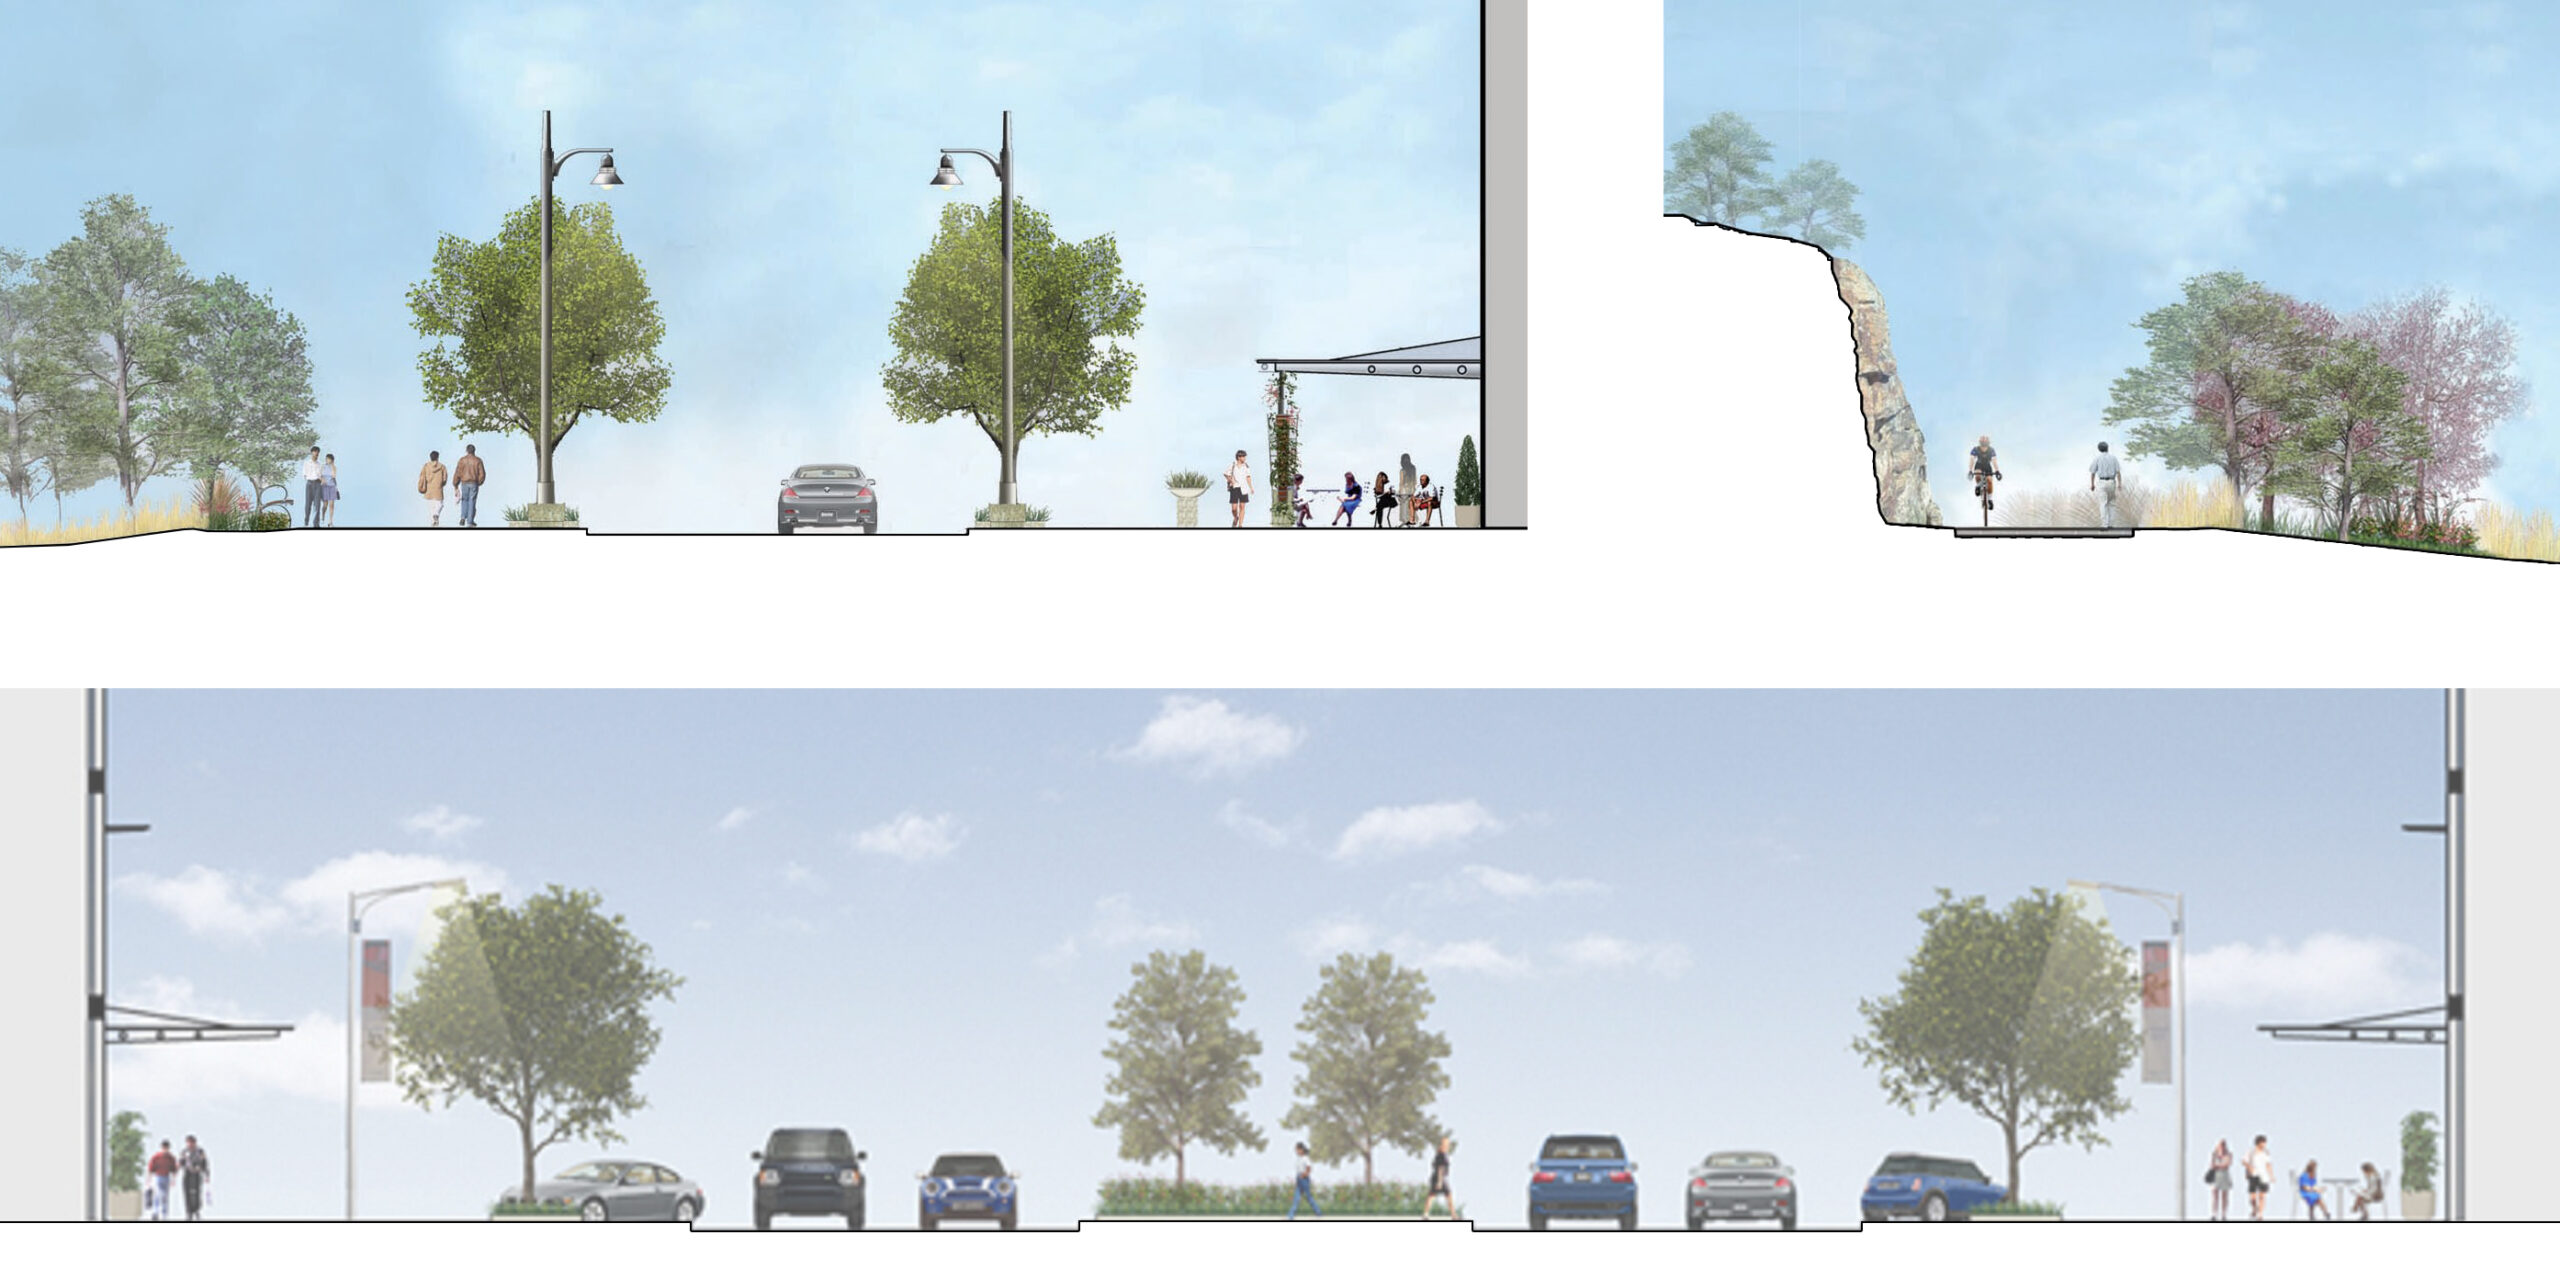 Three sections showcasing streetscape and walking trails from The Canyon in Oak Cliff masterplan, featuring pedestrian sidewalks, walking trails, lush medians with native grasses and street trees, and street parking.